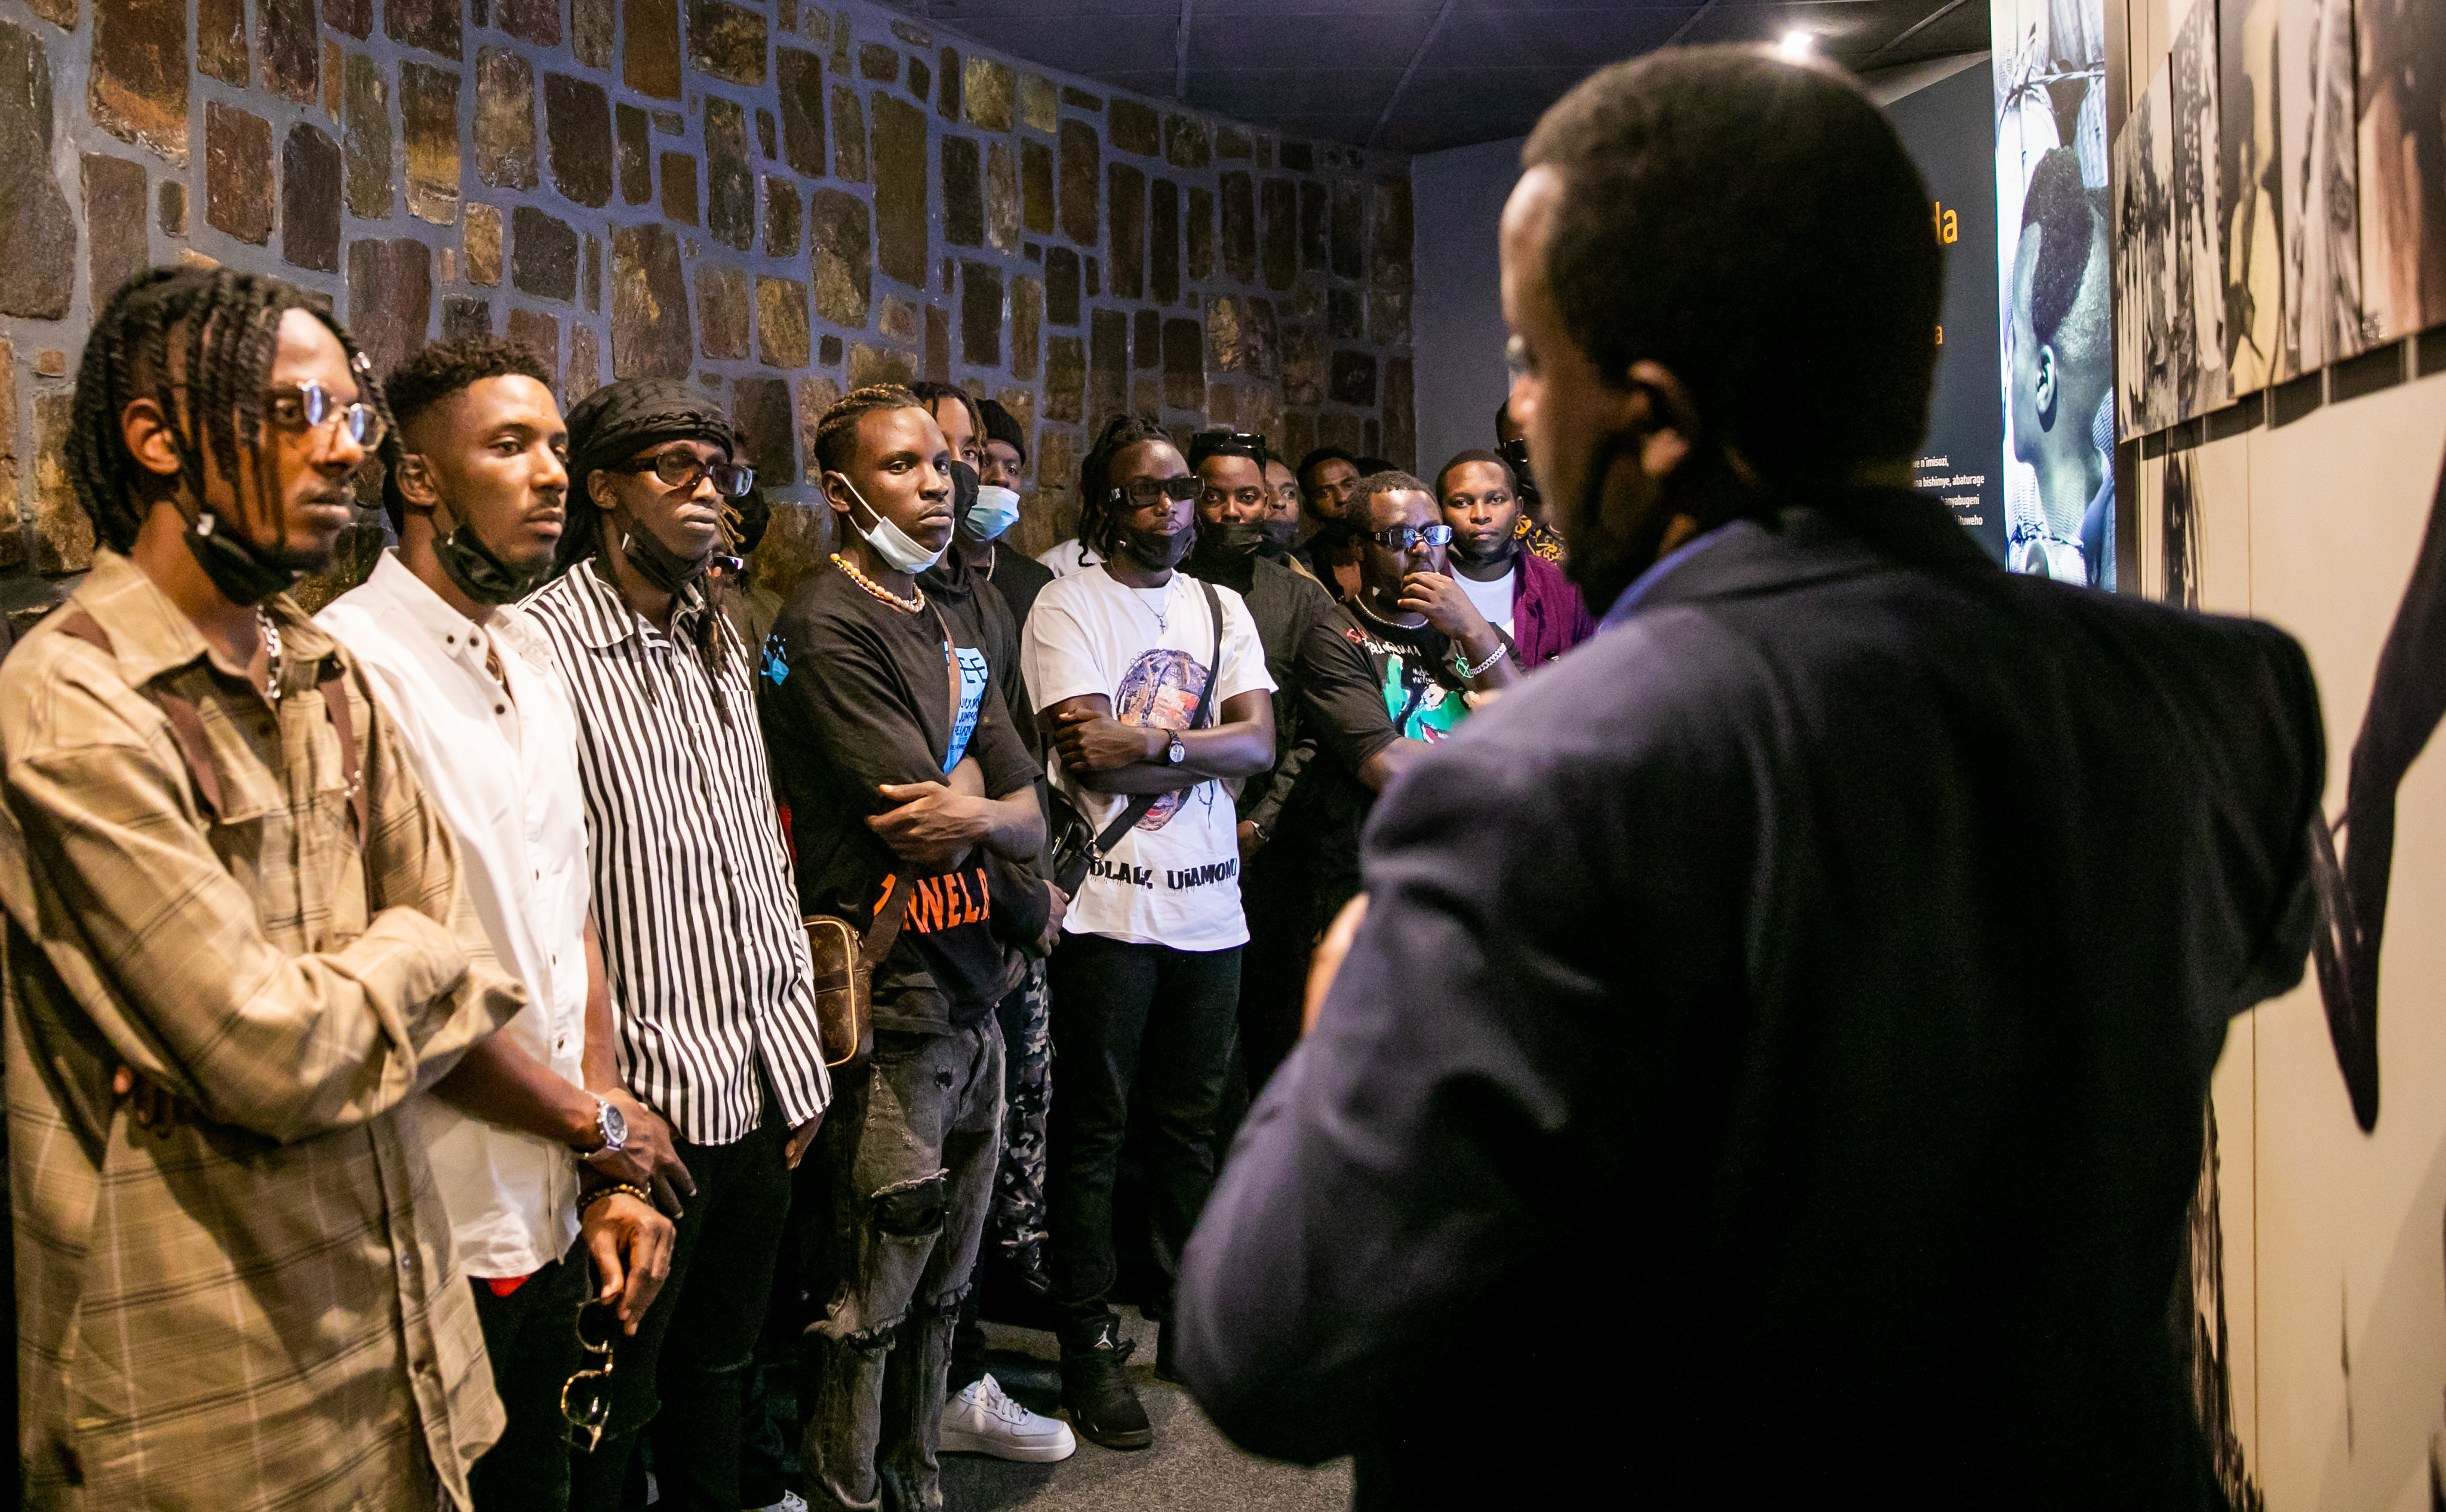 Artistes are taken through Rwandau2019s traumatic history during their visit to the Kigali Genocide Memorial. / Photos by Olivier Mugwiza